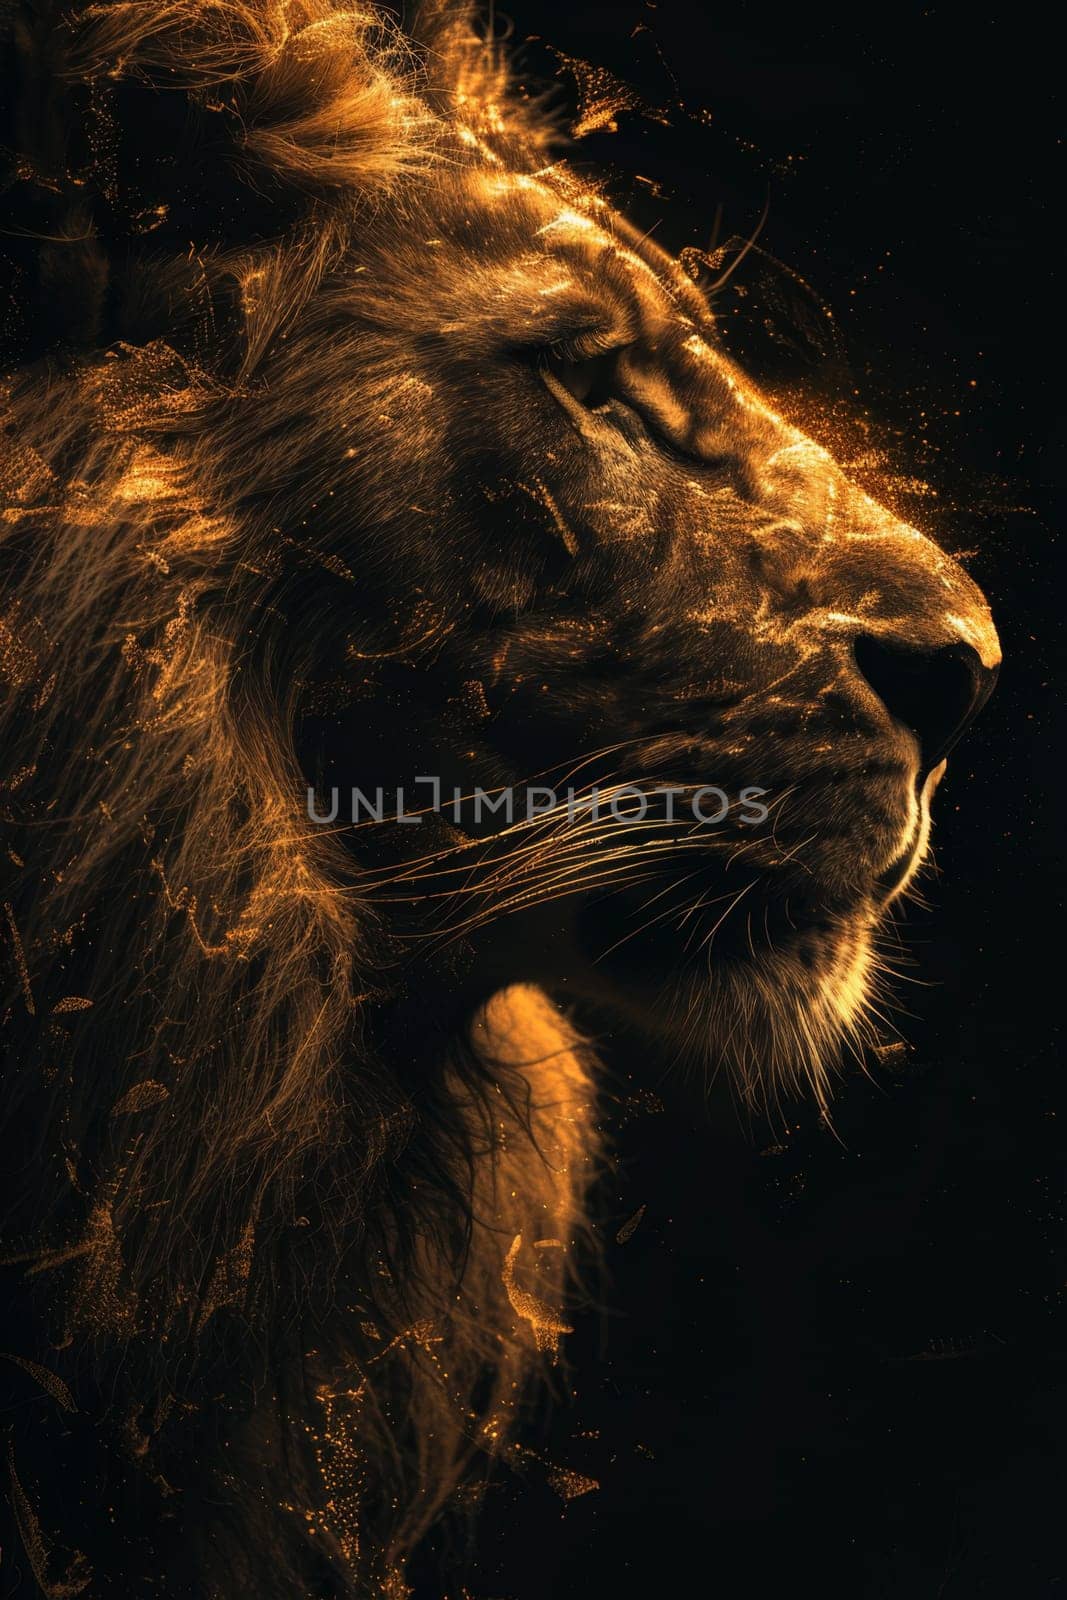 portrait of a lion's head on a black background. The illustration.